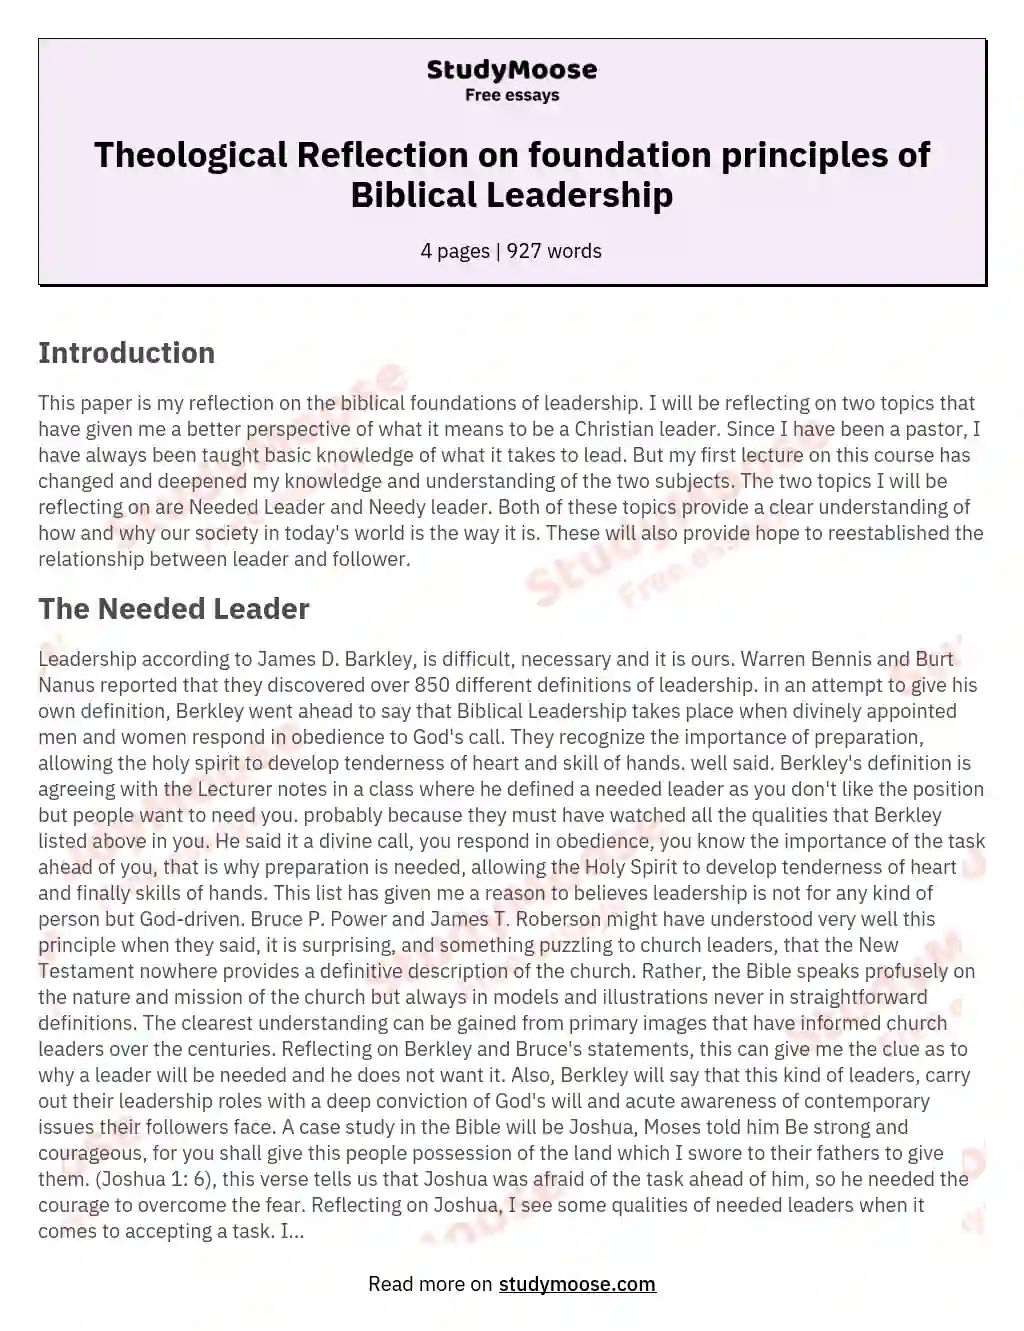 Theological Reflection on foundation principles of Biblical Leadership essay